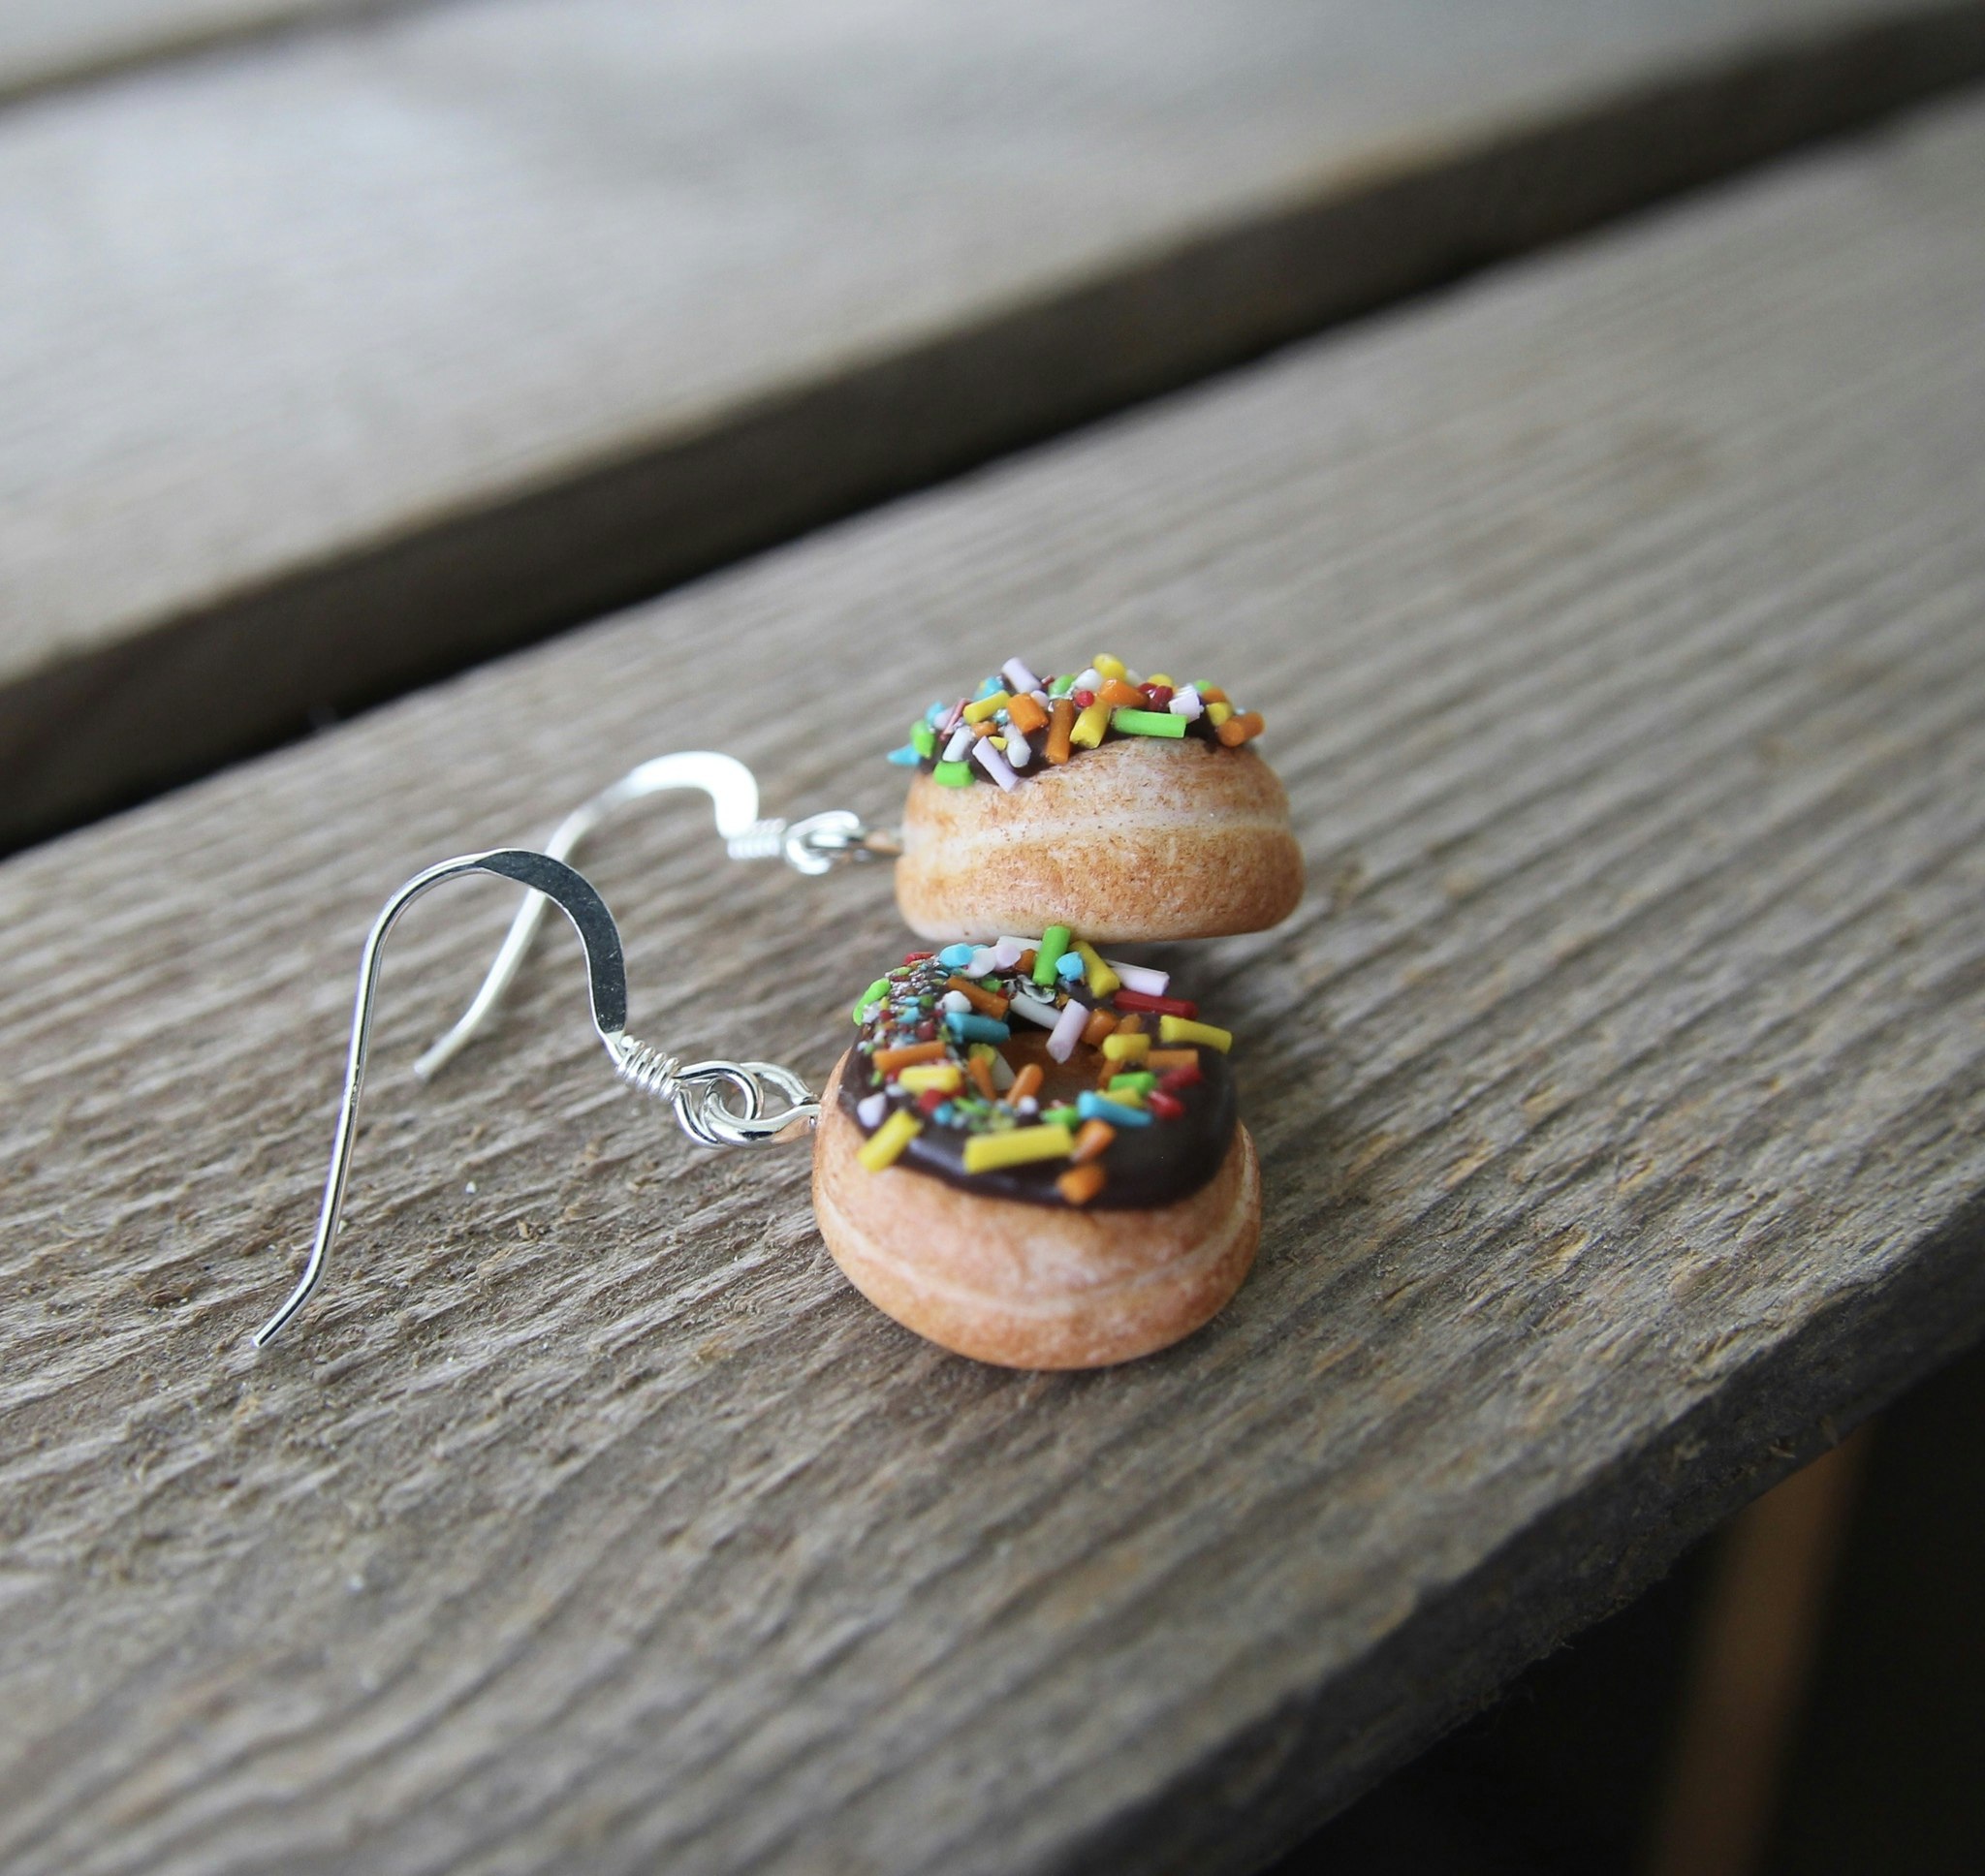 Earrings, donuts with chocolate glaze and caramel sprinkles without a bite